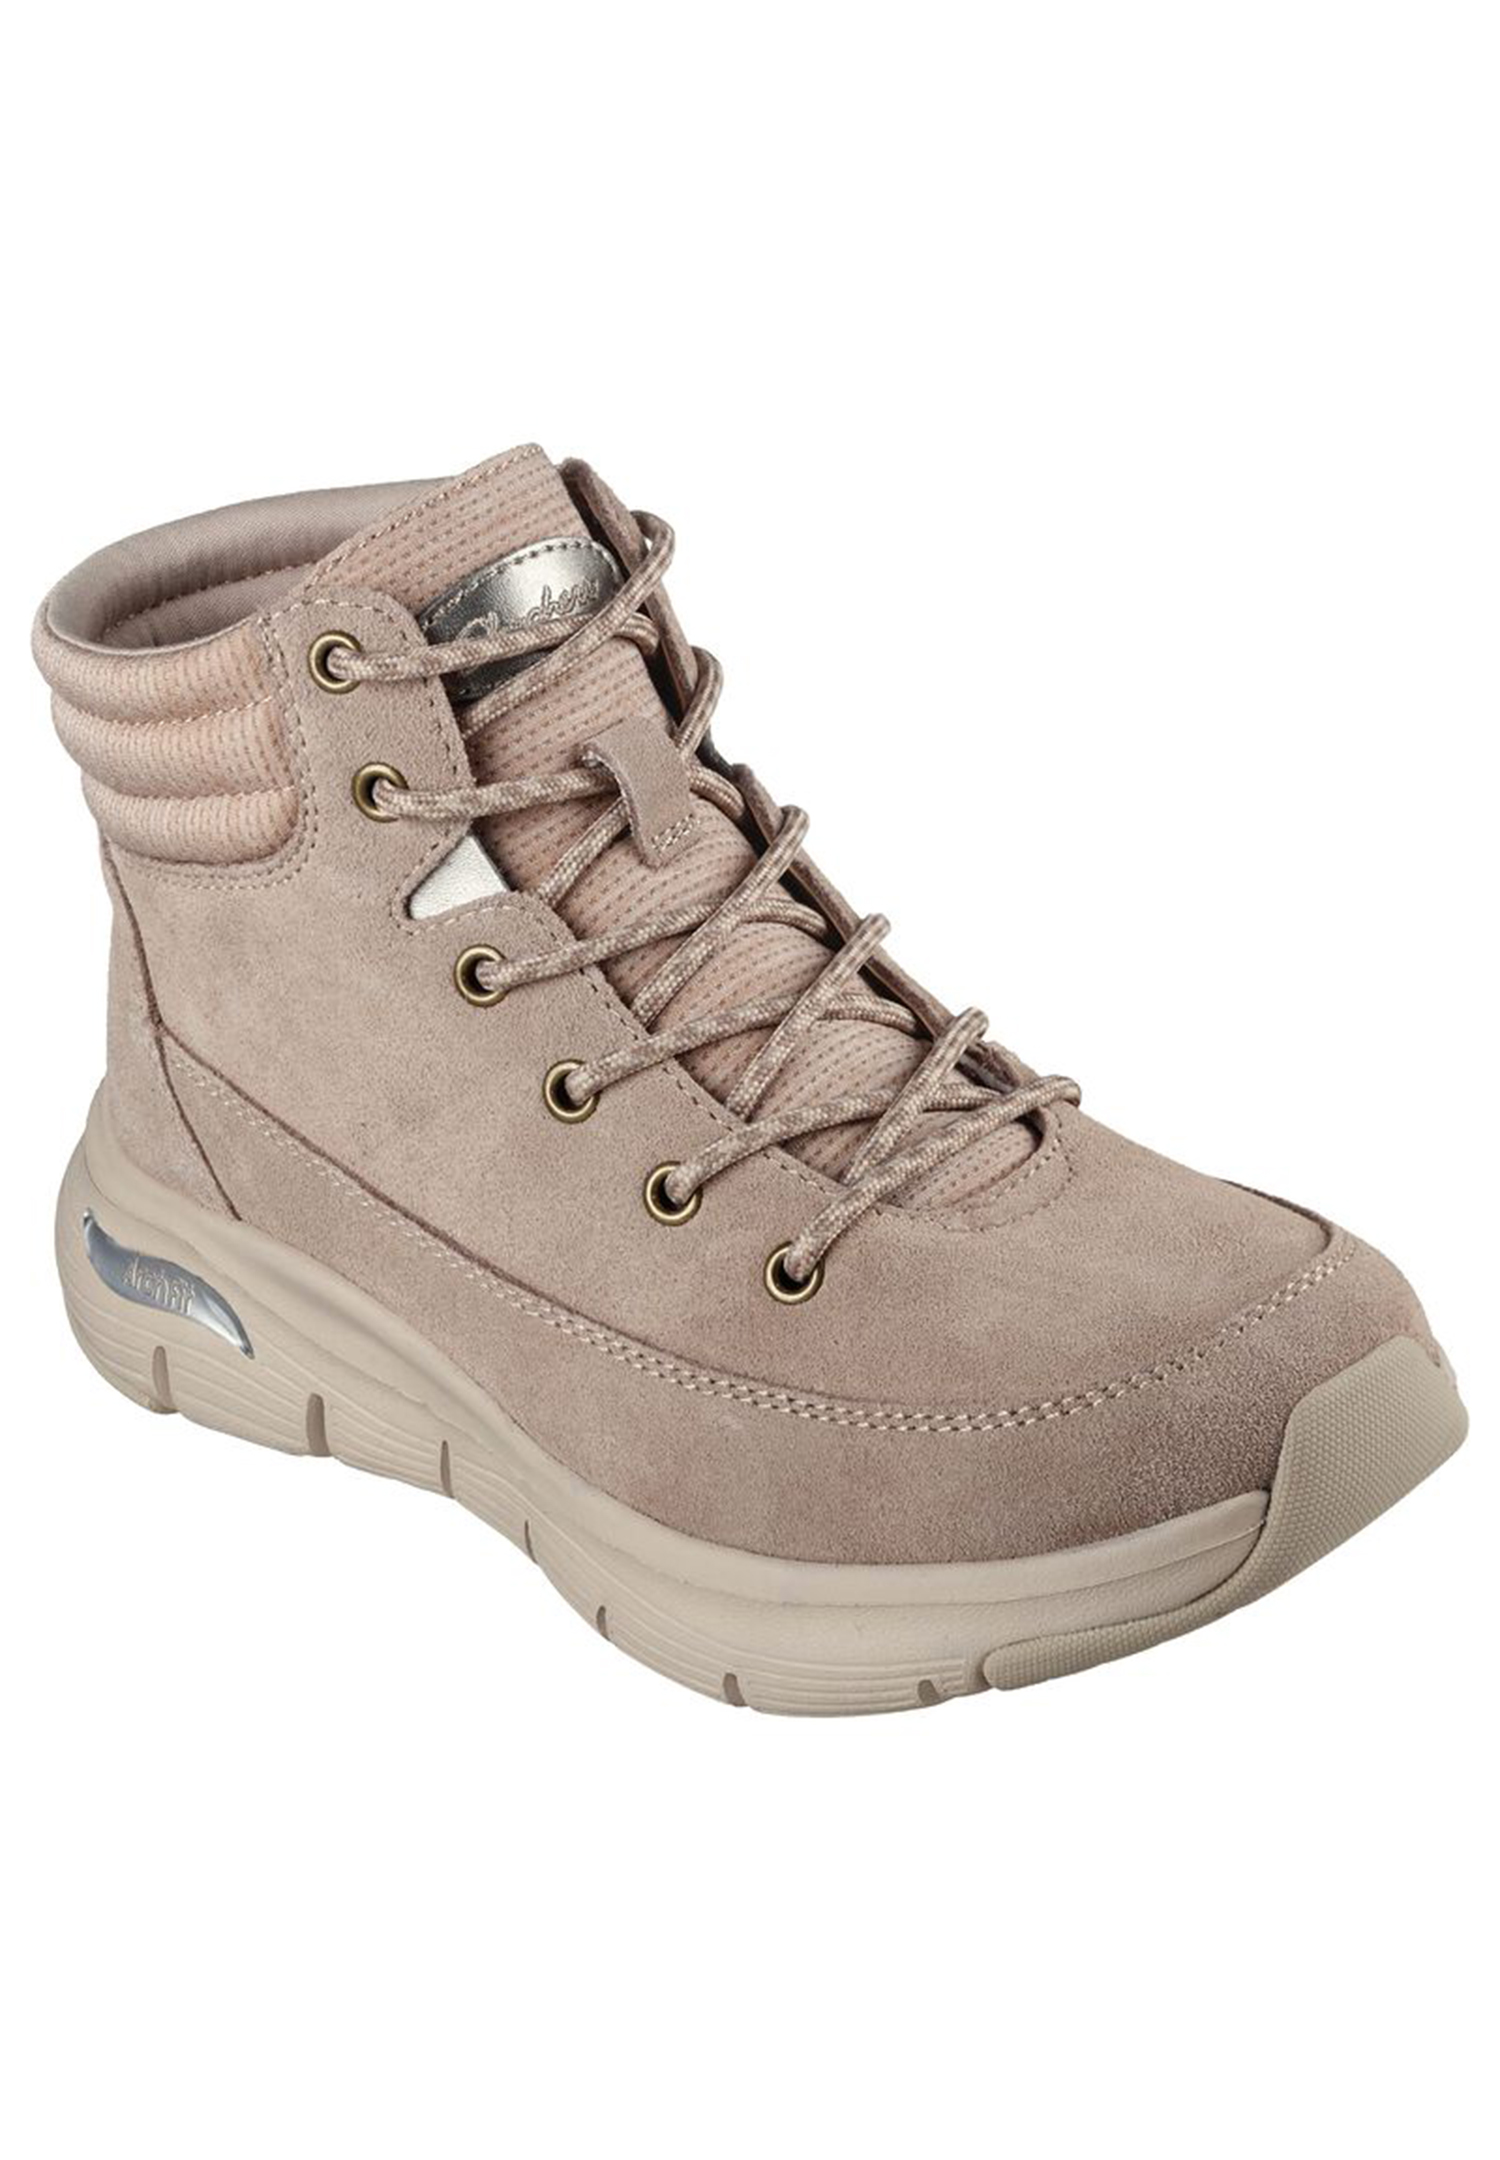 Skechers Arch Fit Smooth COMFY CHILL Damen Stiefel 167373 TPE taupe